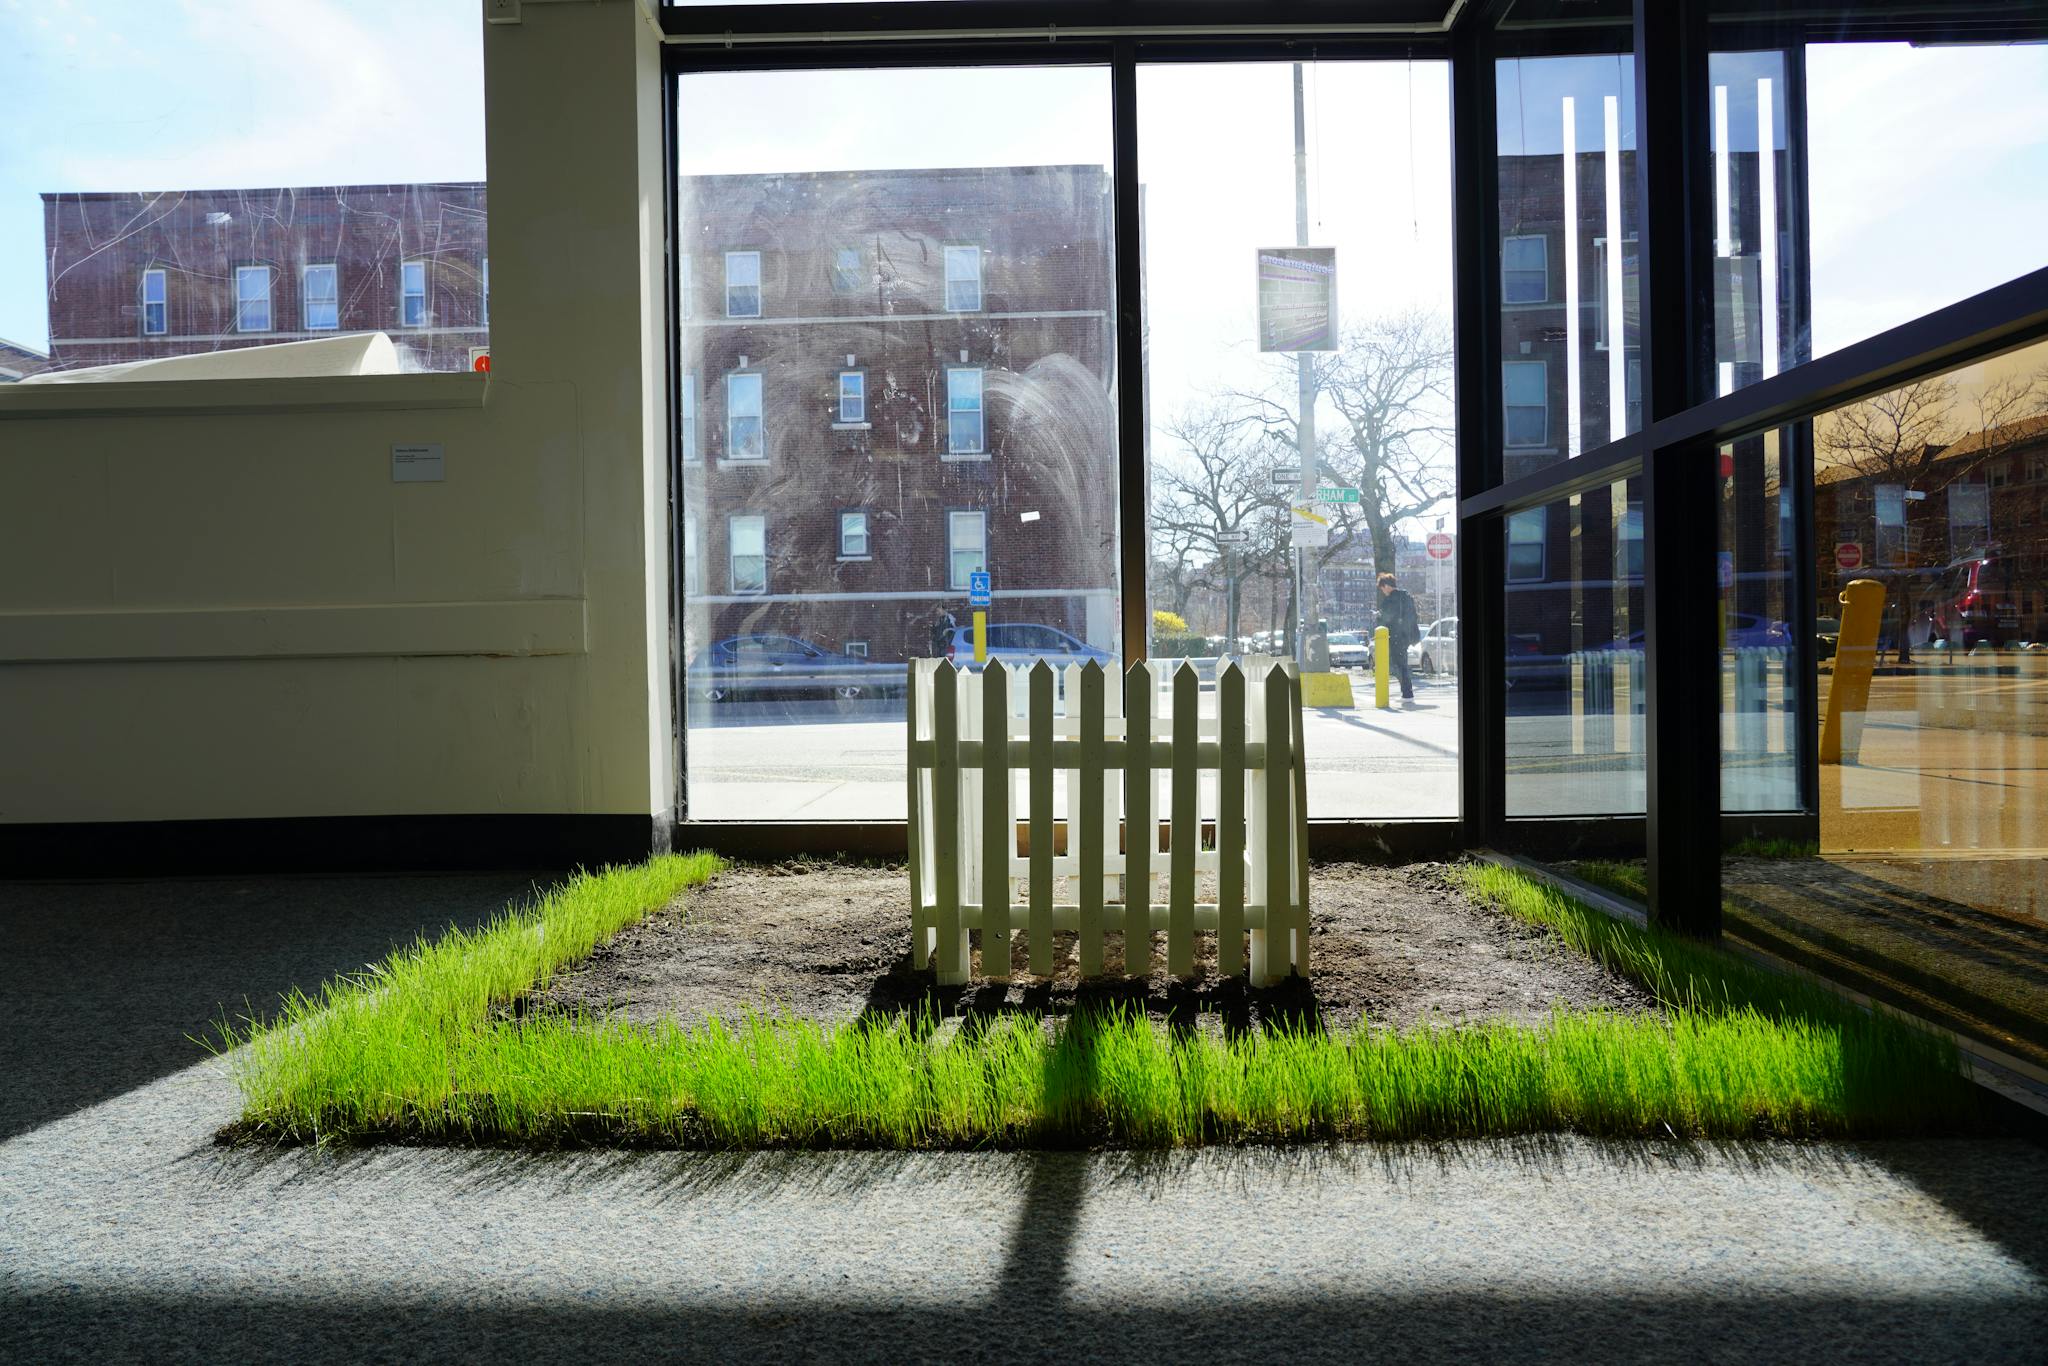 A white picket fence emerges in a patch of green grass in the indoor exhibition space.